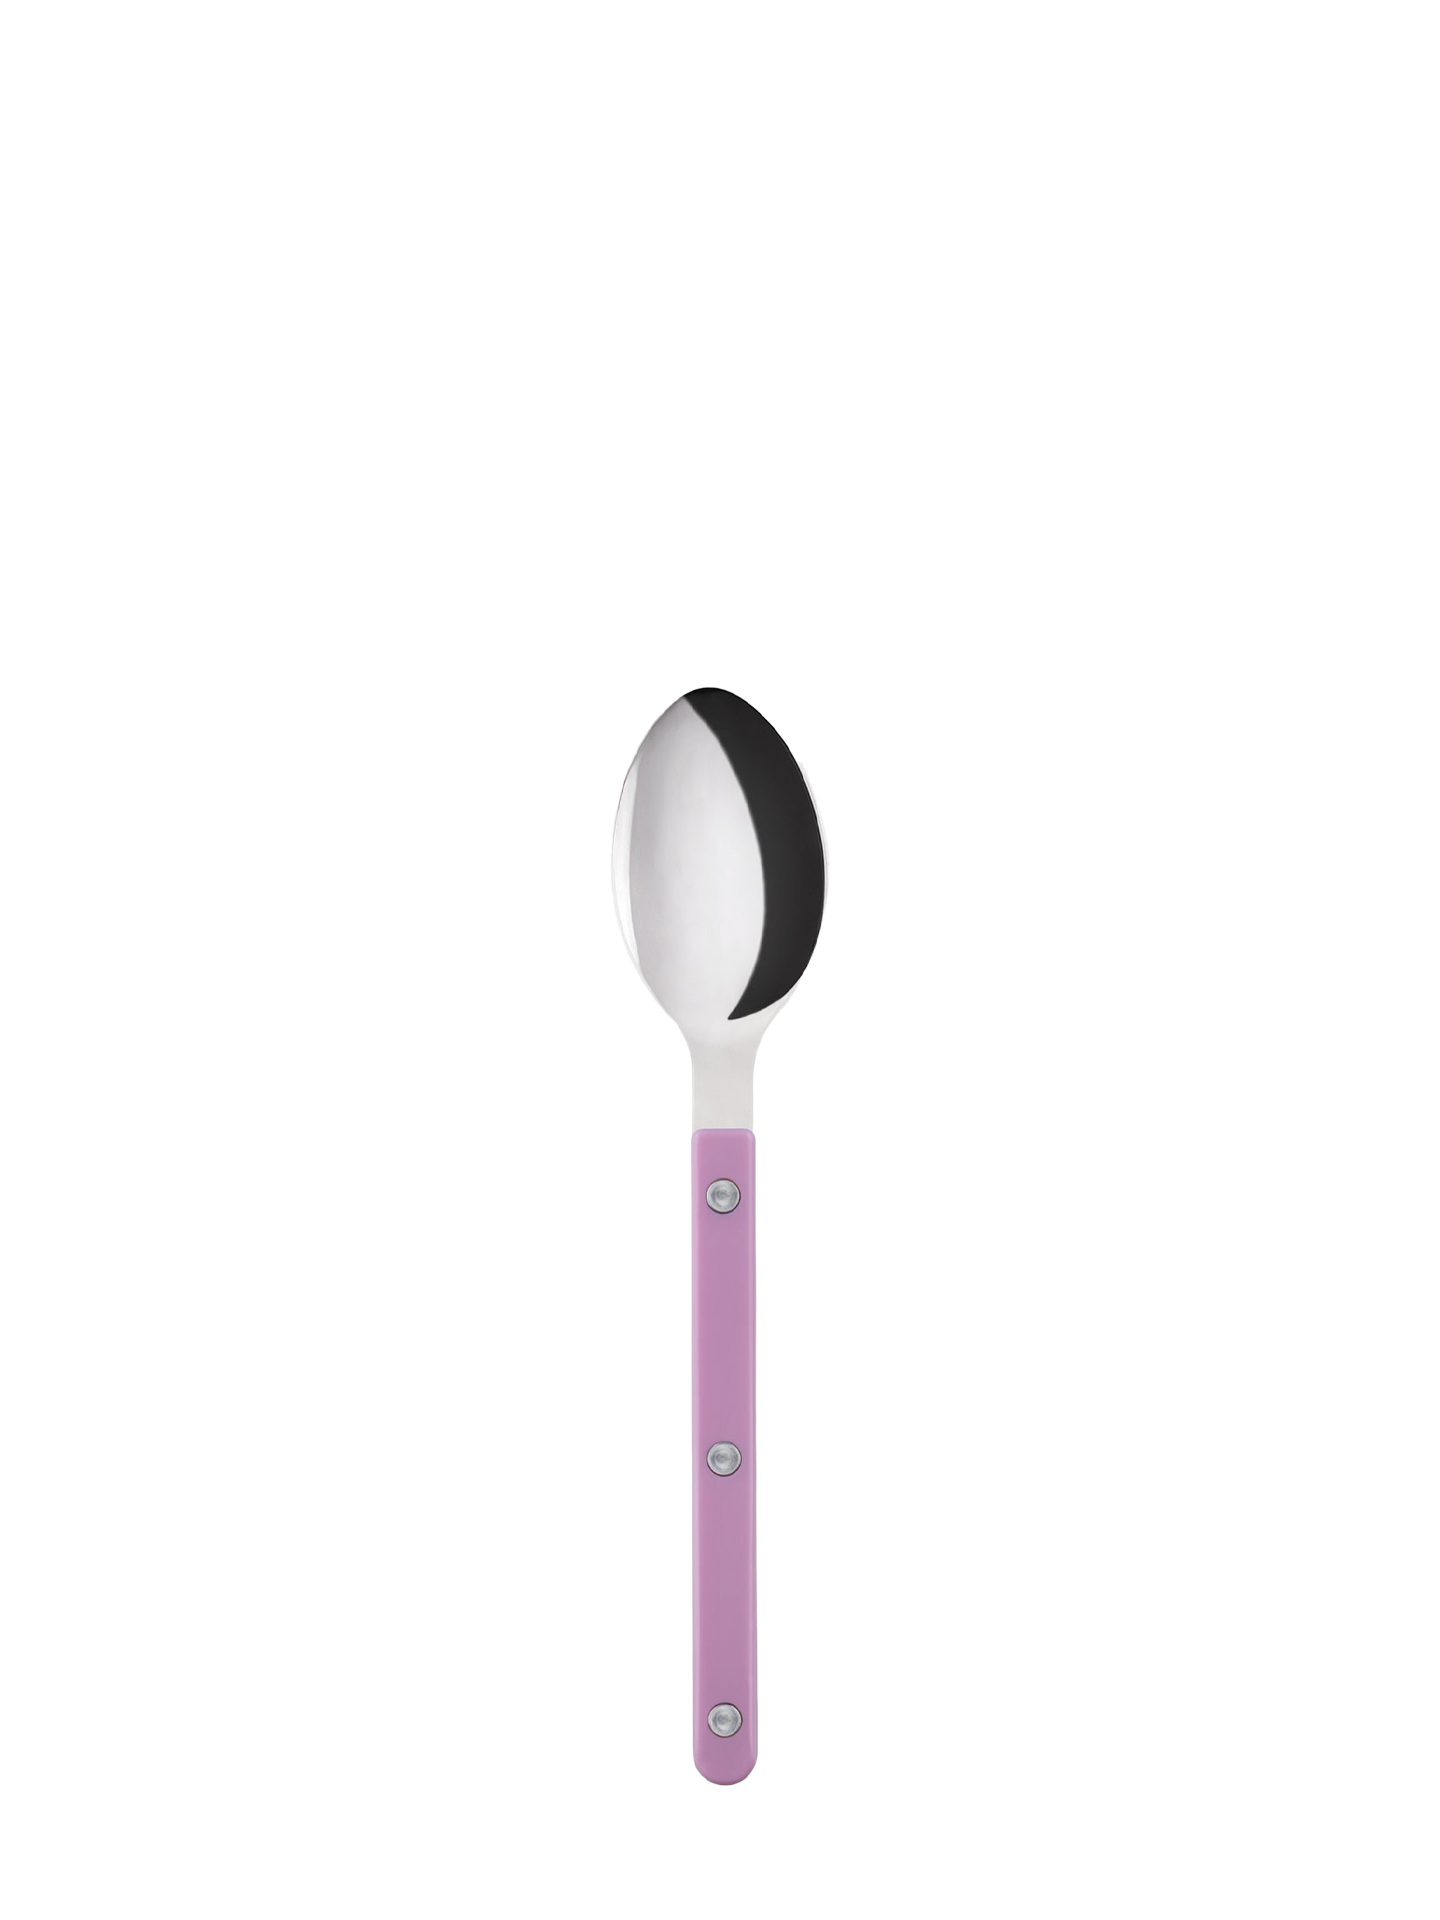 The cute pink tea spoon from the Bistrot collection is a new interpretation of the cutleries in the traditional Parisian cafés and bistros. Cute as a button, but utilitarian and minimalist otherwise, this little spoon will fit perfectly with contemporary looks adding just little spoonful of French chic.